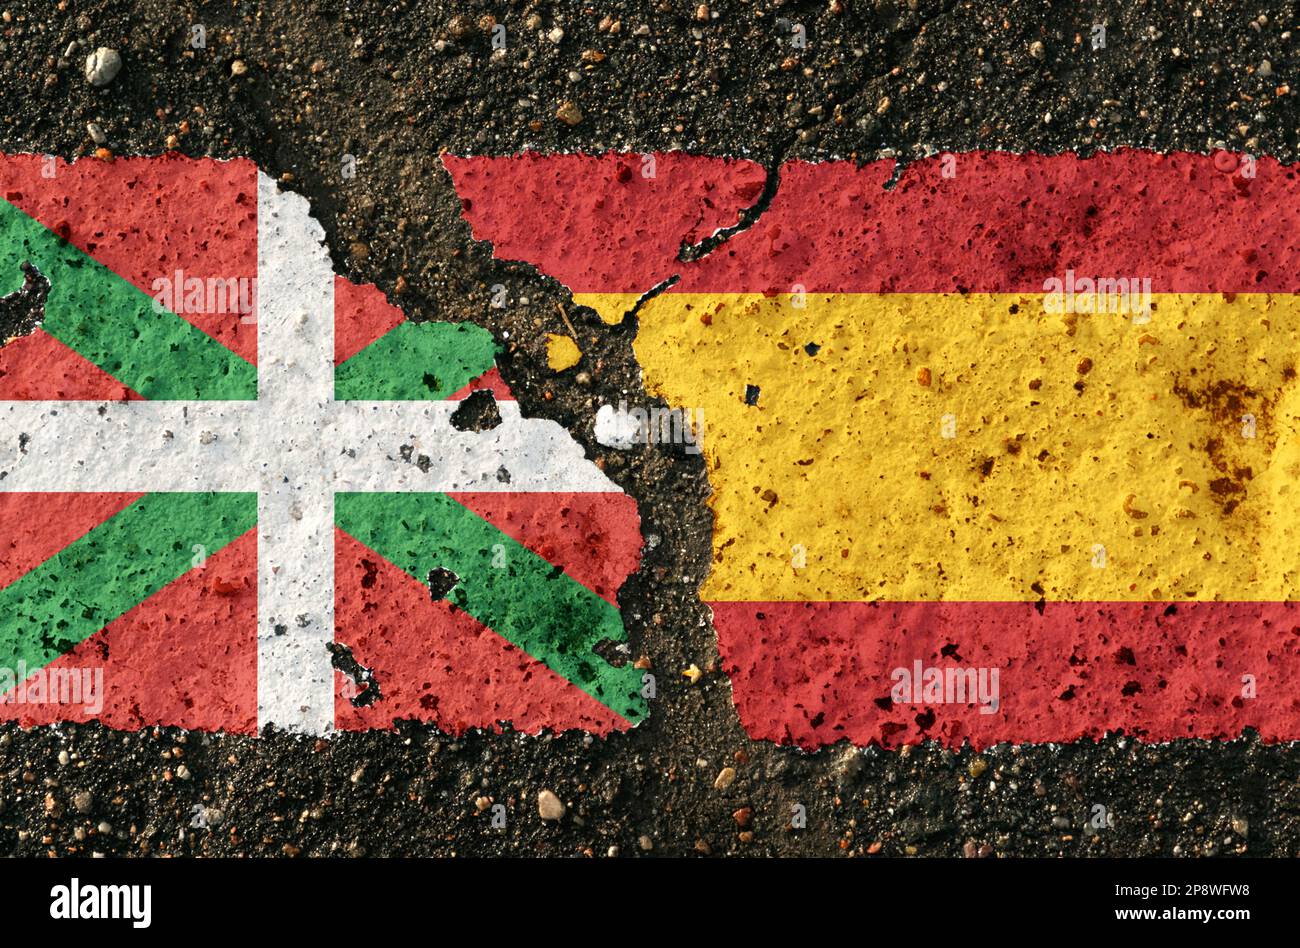 On the pavement there are images of the flags of the Basque Country and Spain, as a confrontation between the two countries. Conceptual image. Stock Photo